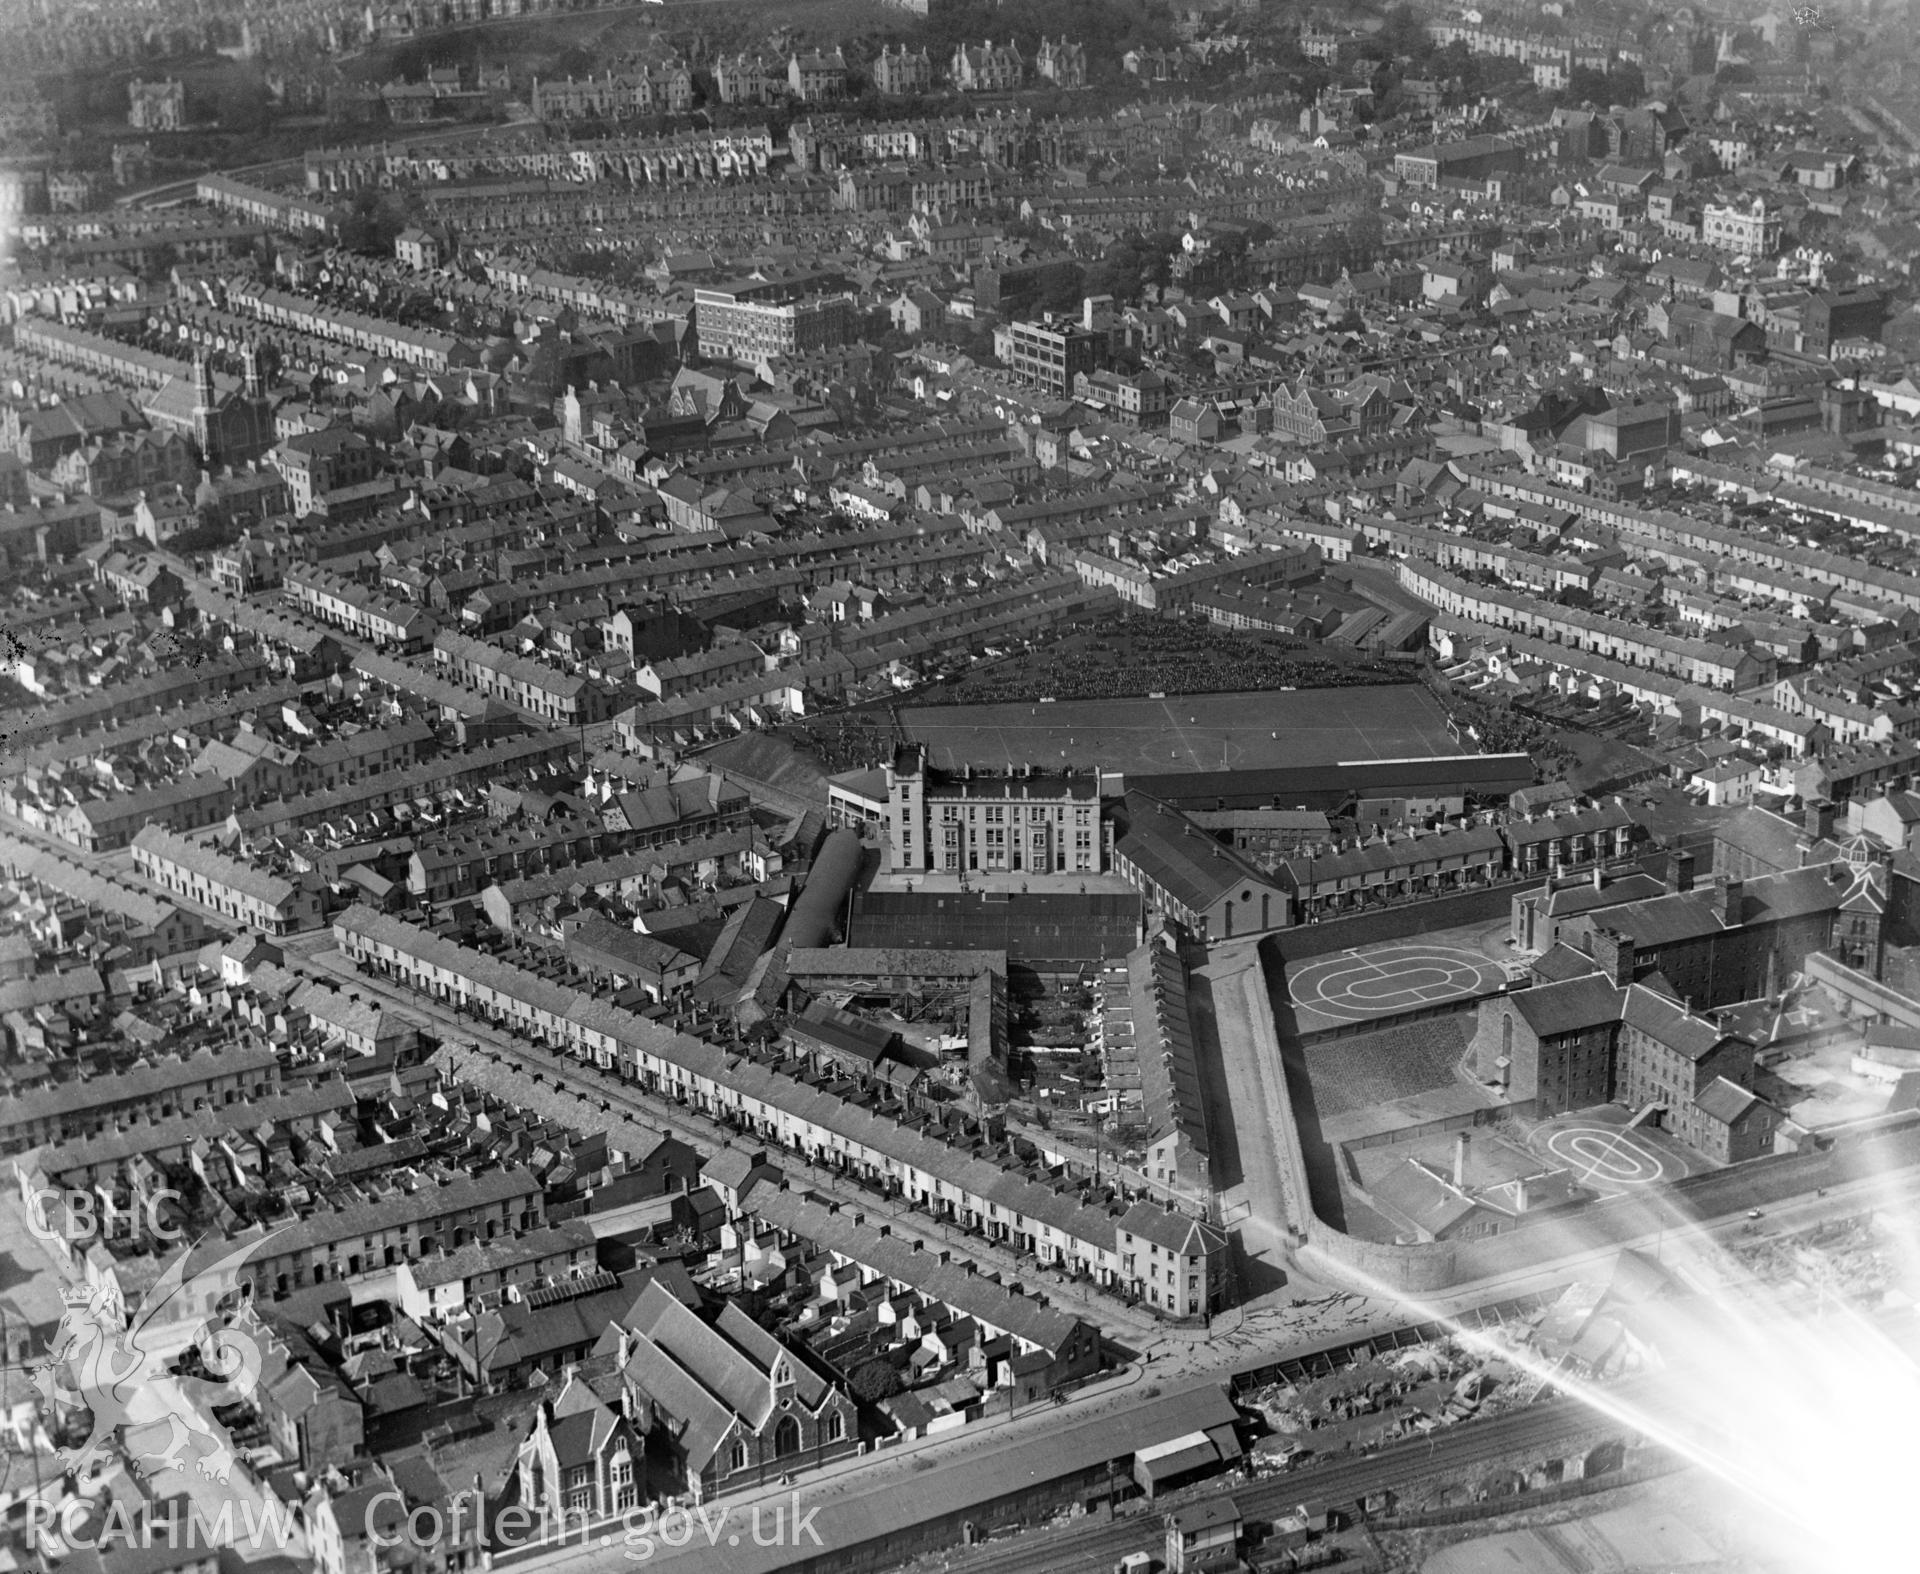 View of Swansea showing Vetch football ground with match in progress, and the prison, oblique aerial view. 5?x4? black and white glass plate negative.